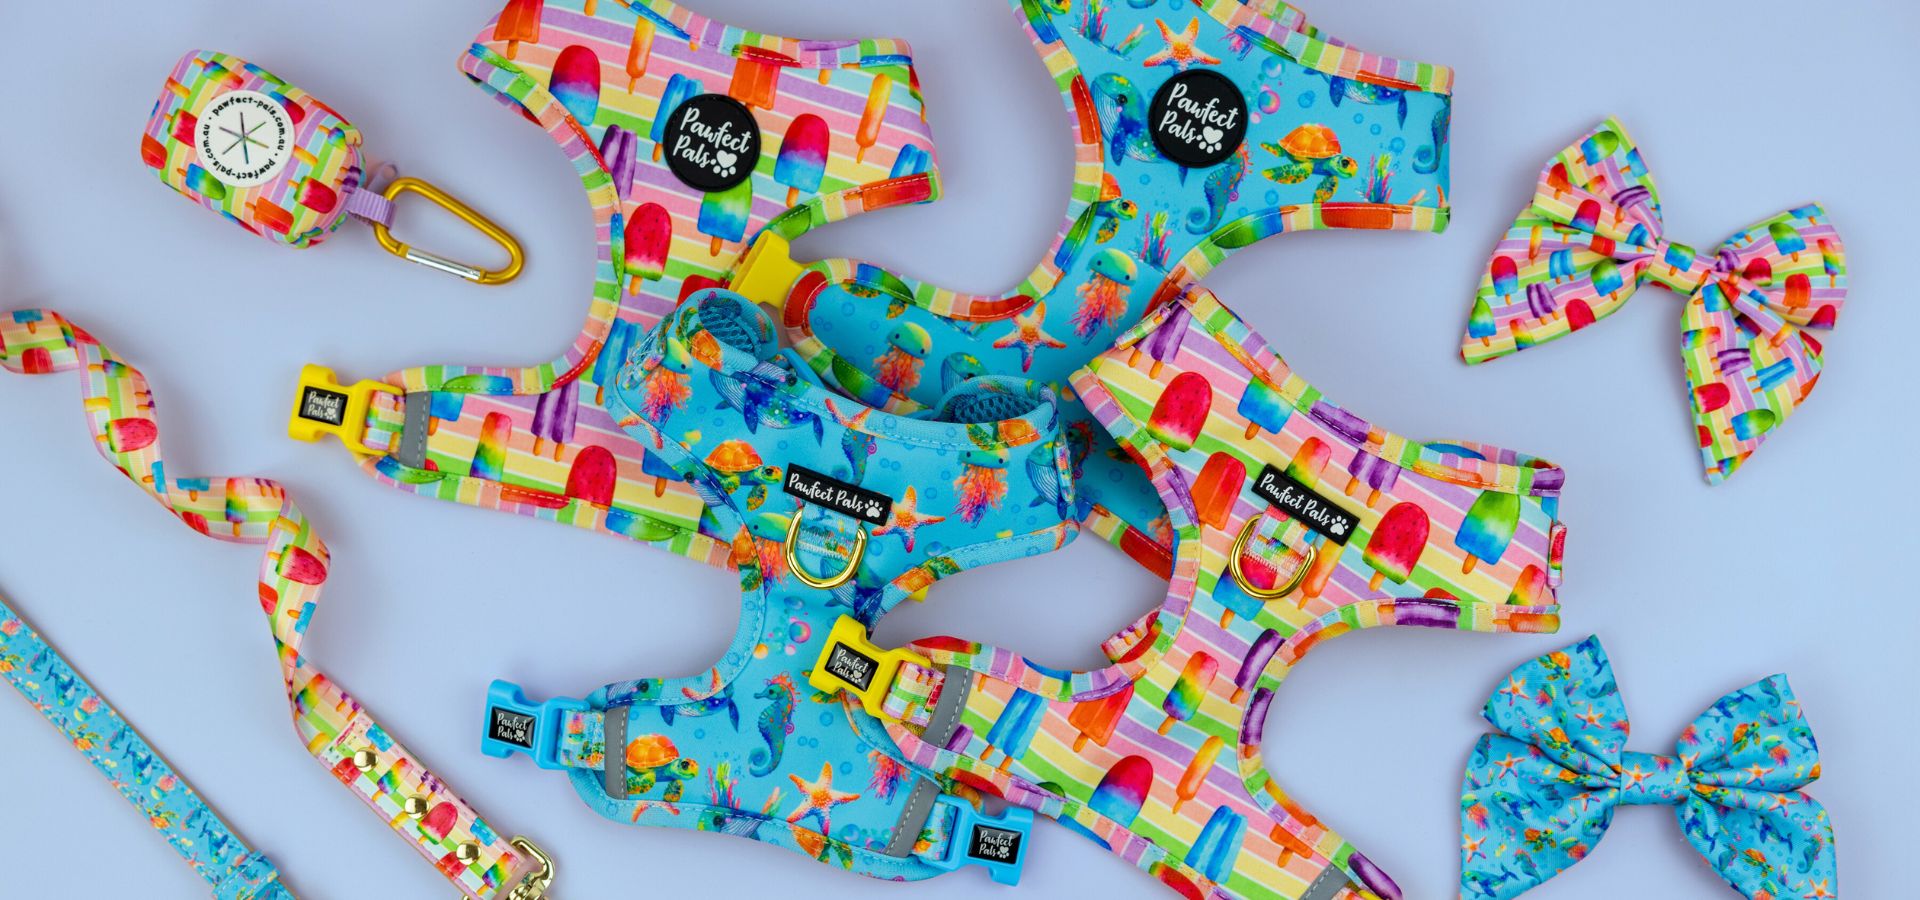 Dogs Just Wanna have Sun Collection Image - Dog Harnesses and leads